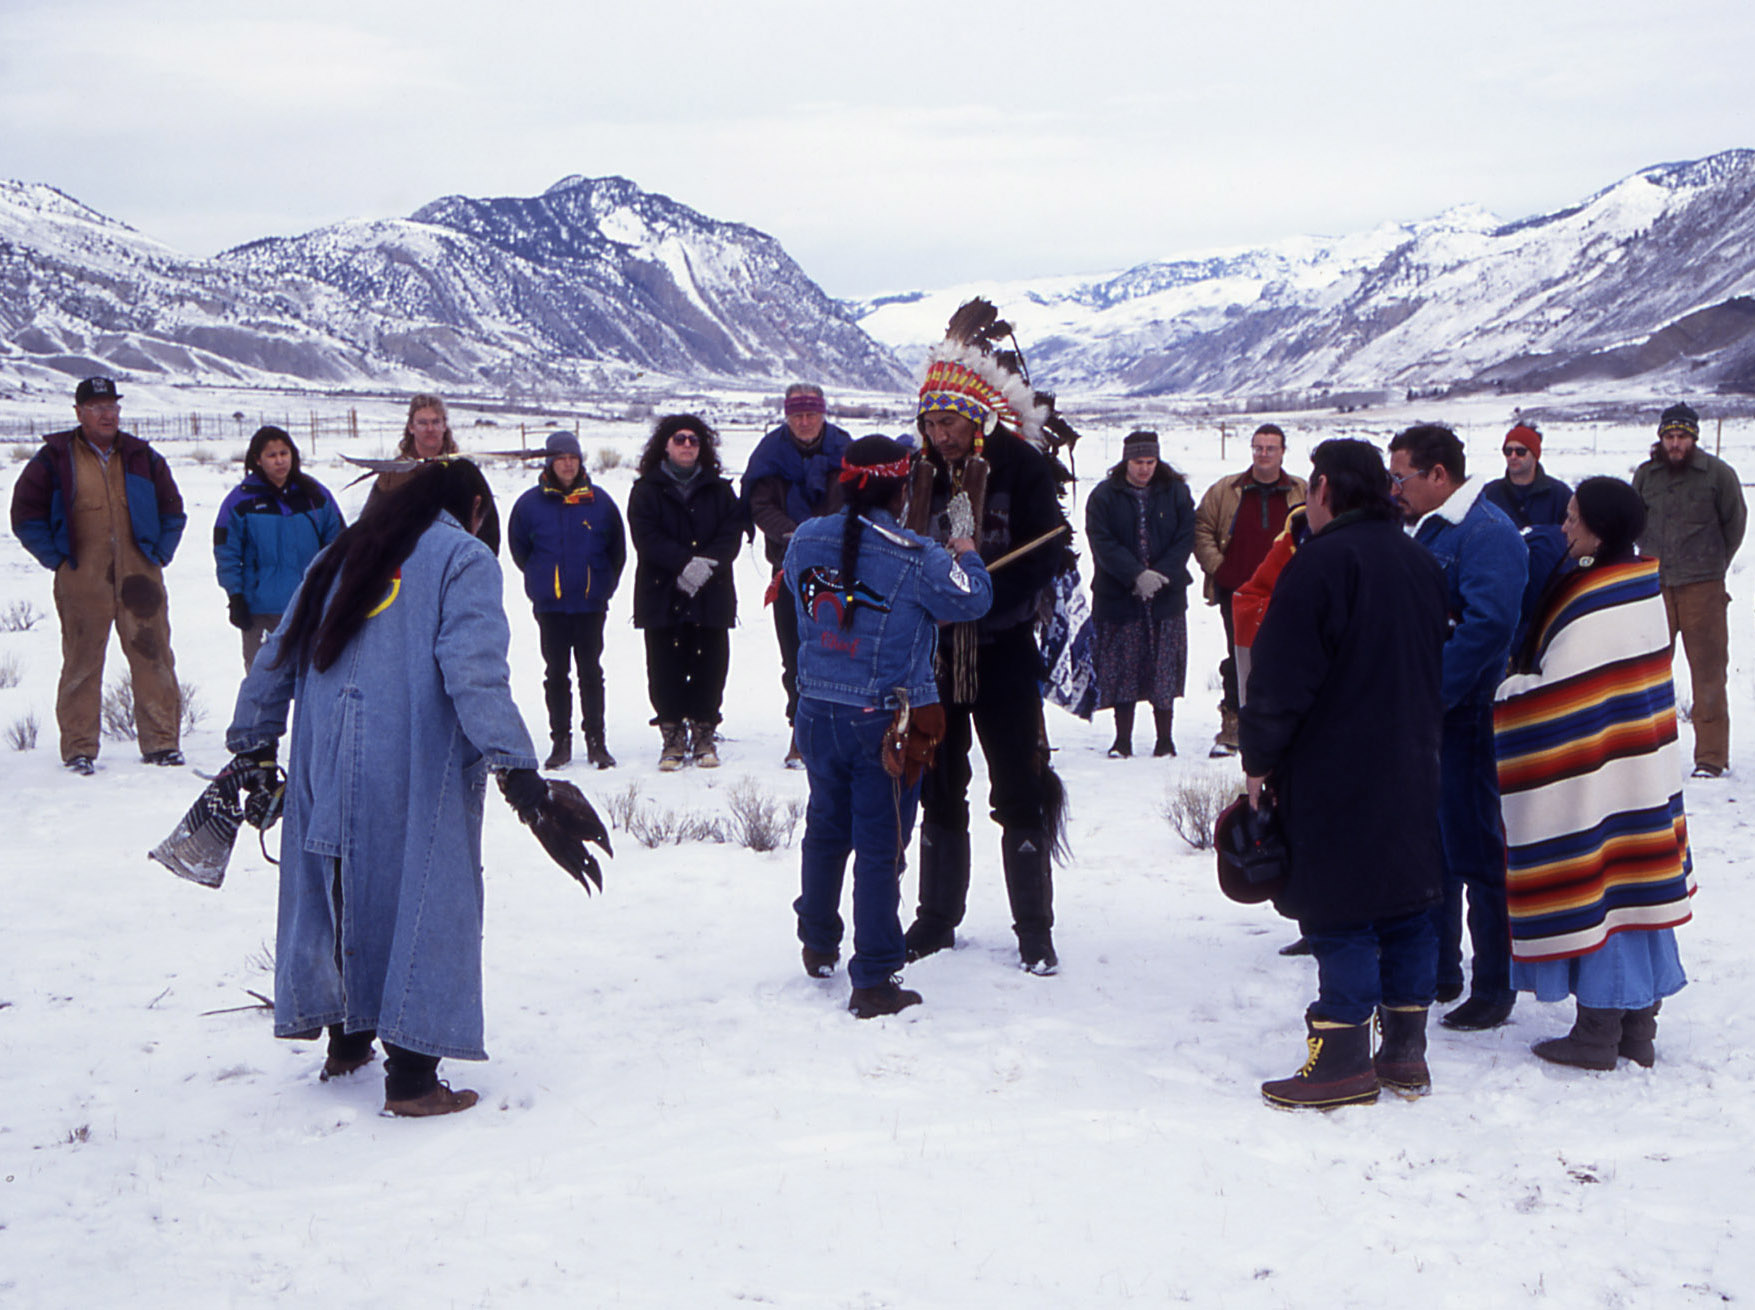 Native American people, some in traditional dress, gather with White people in a snowy mountain landscape.